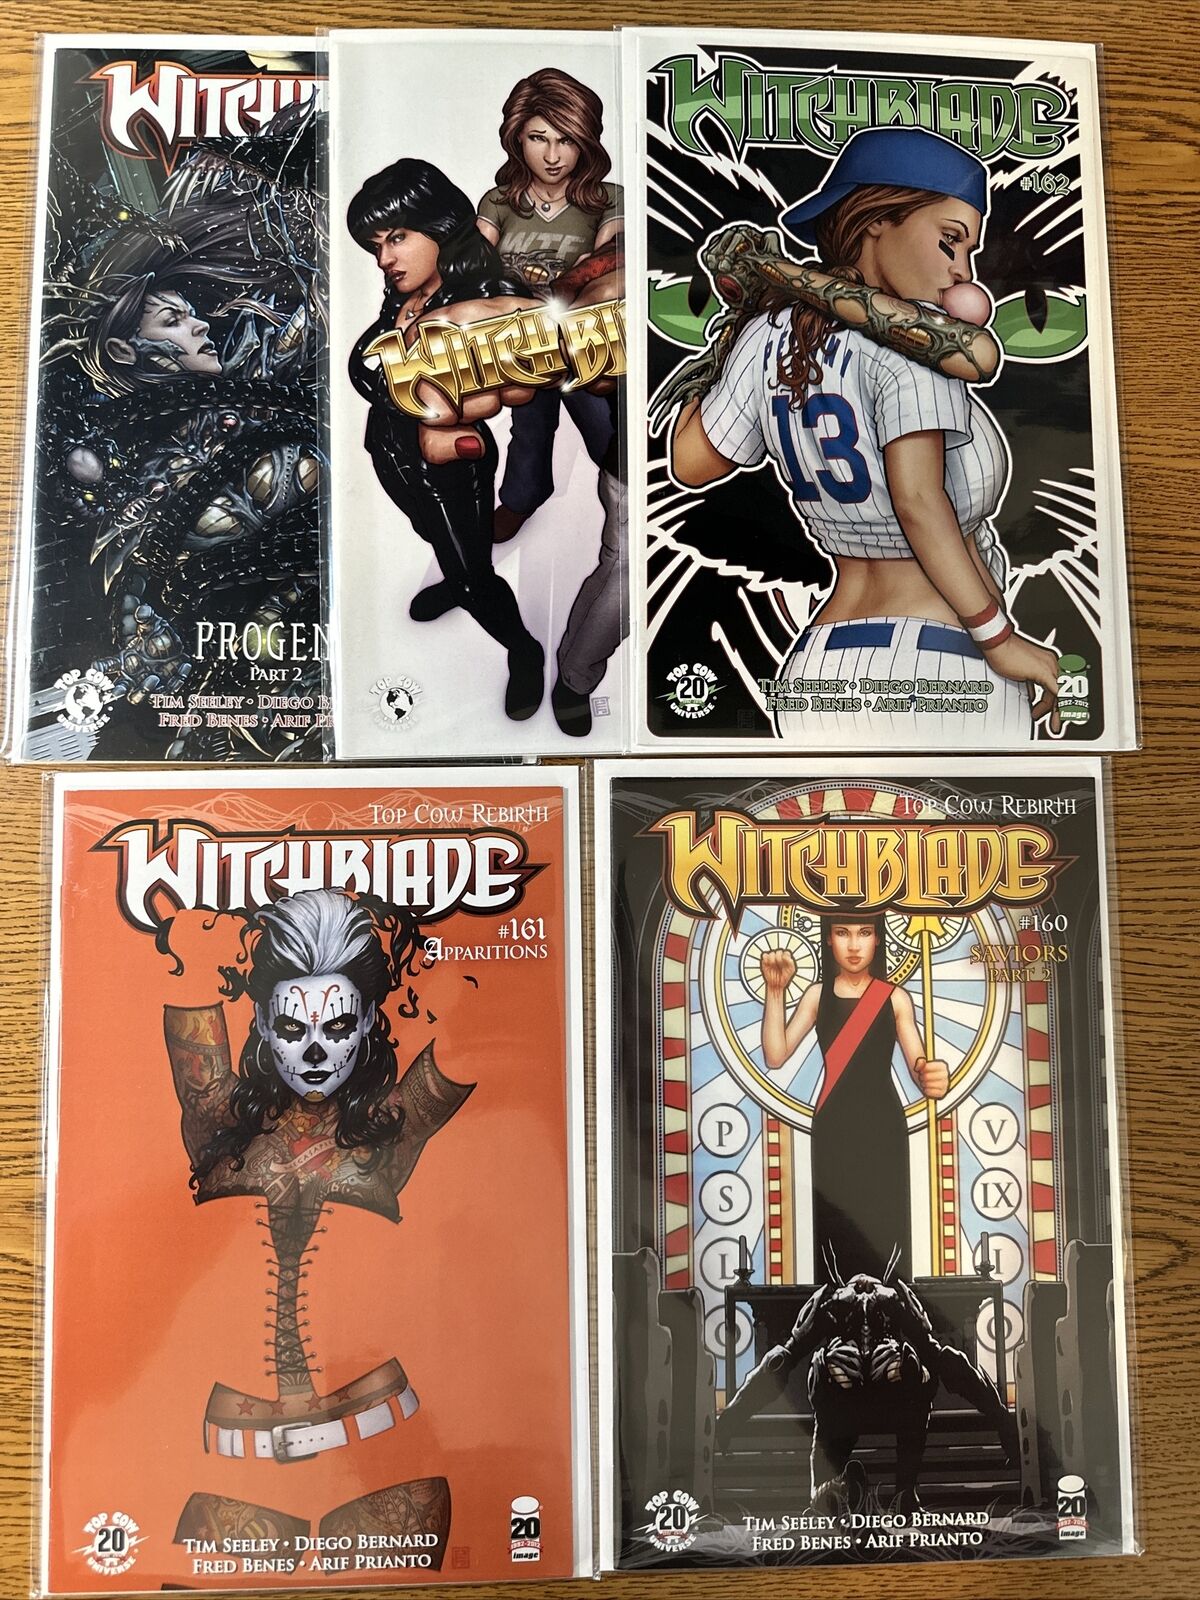 Witchblade #160 161 162 163 164 Top Cow Image Series Lot Run Set 1st Print VF/NM